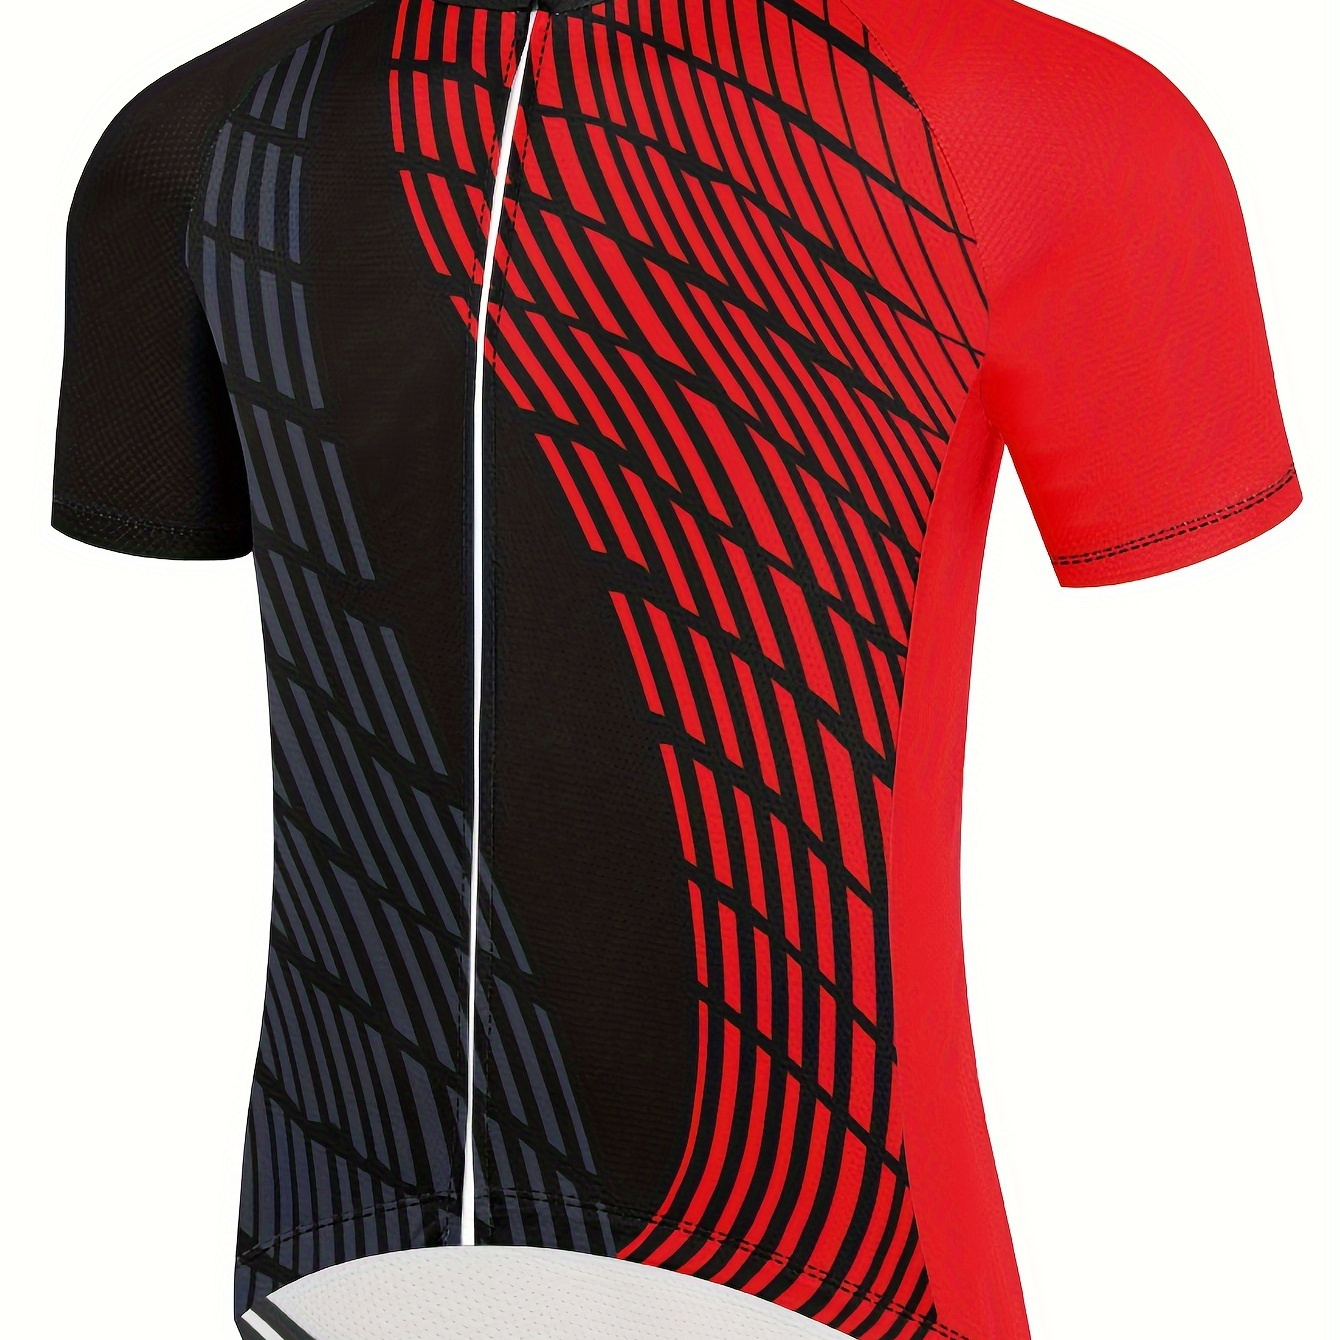 

Color Blocked Design Short Sleeve Zip-up Cycling Jersey For Men, Breathable Quick Drying Cycling Shirt With 3 Back Pockets For Cyclists